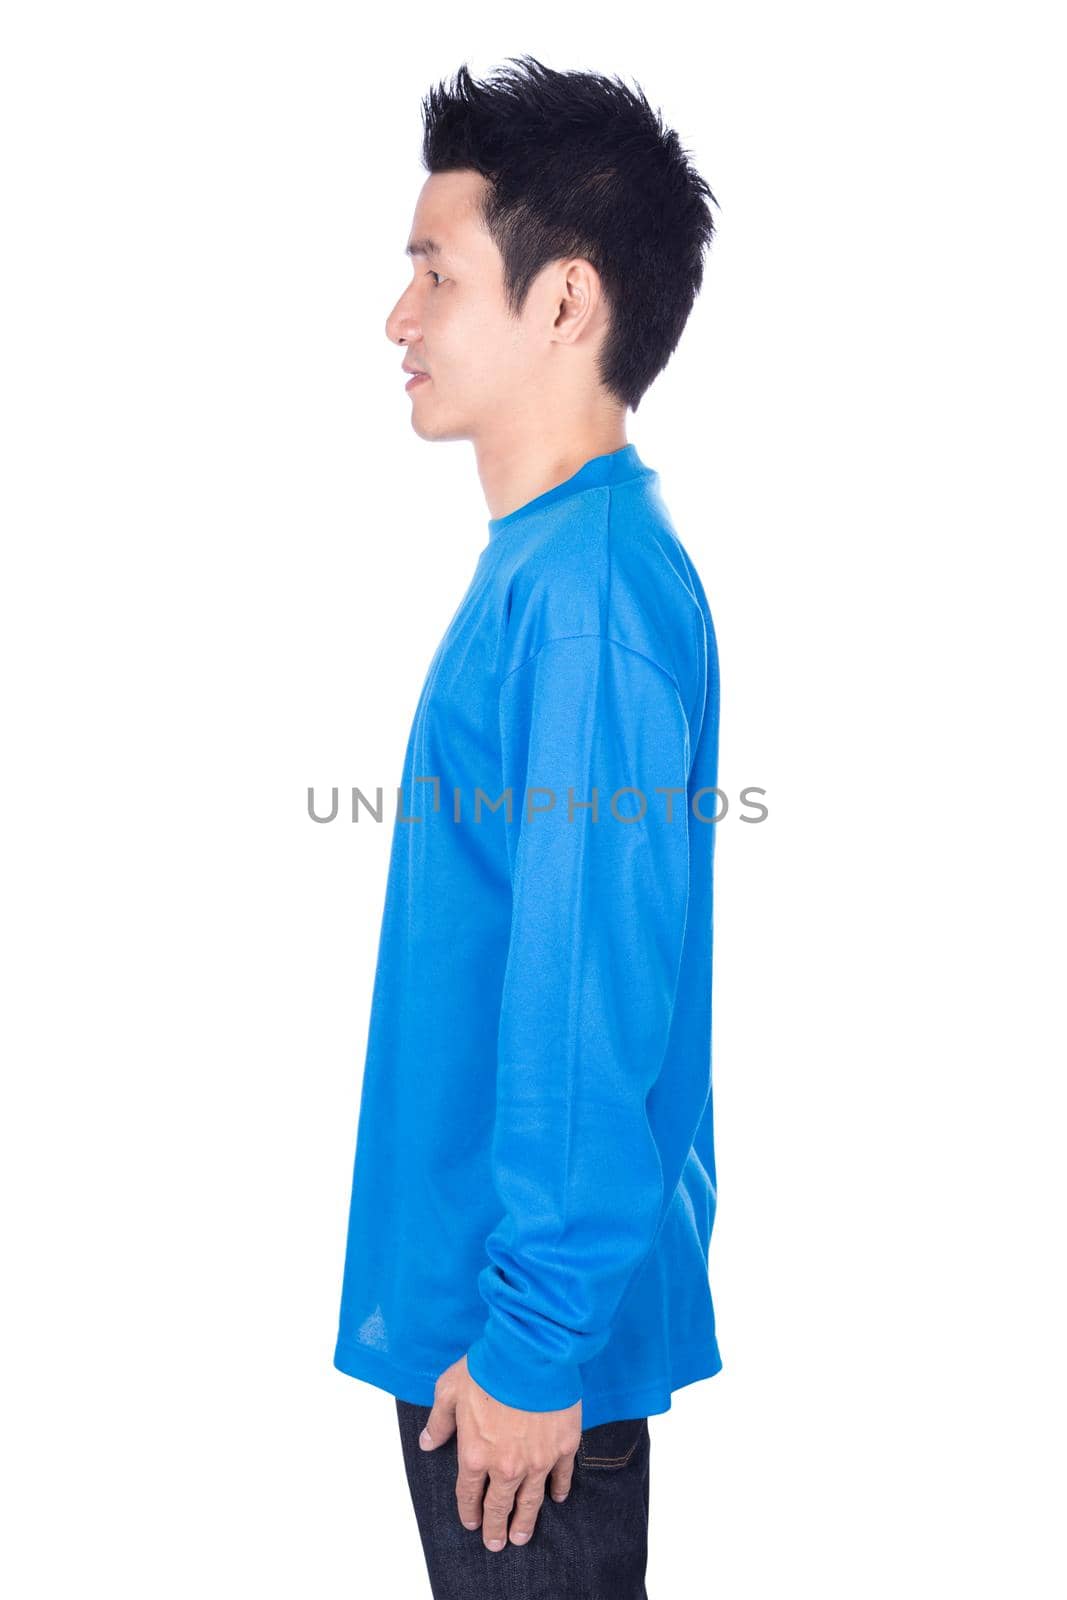 man in blue long sleeve t-shirt isolated on a white background (side view)